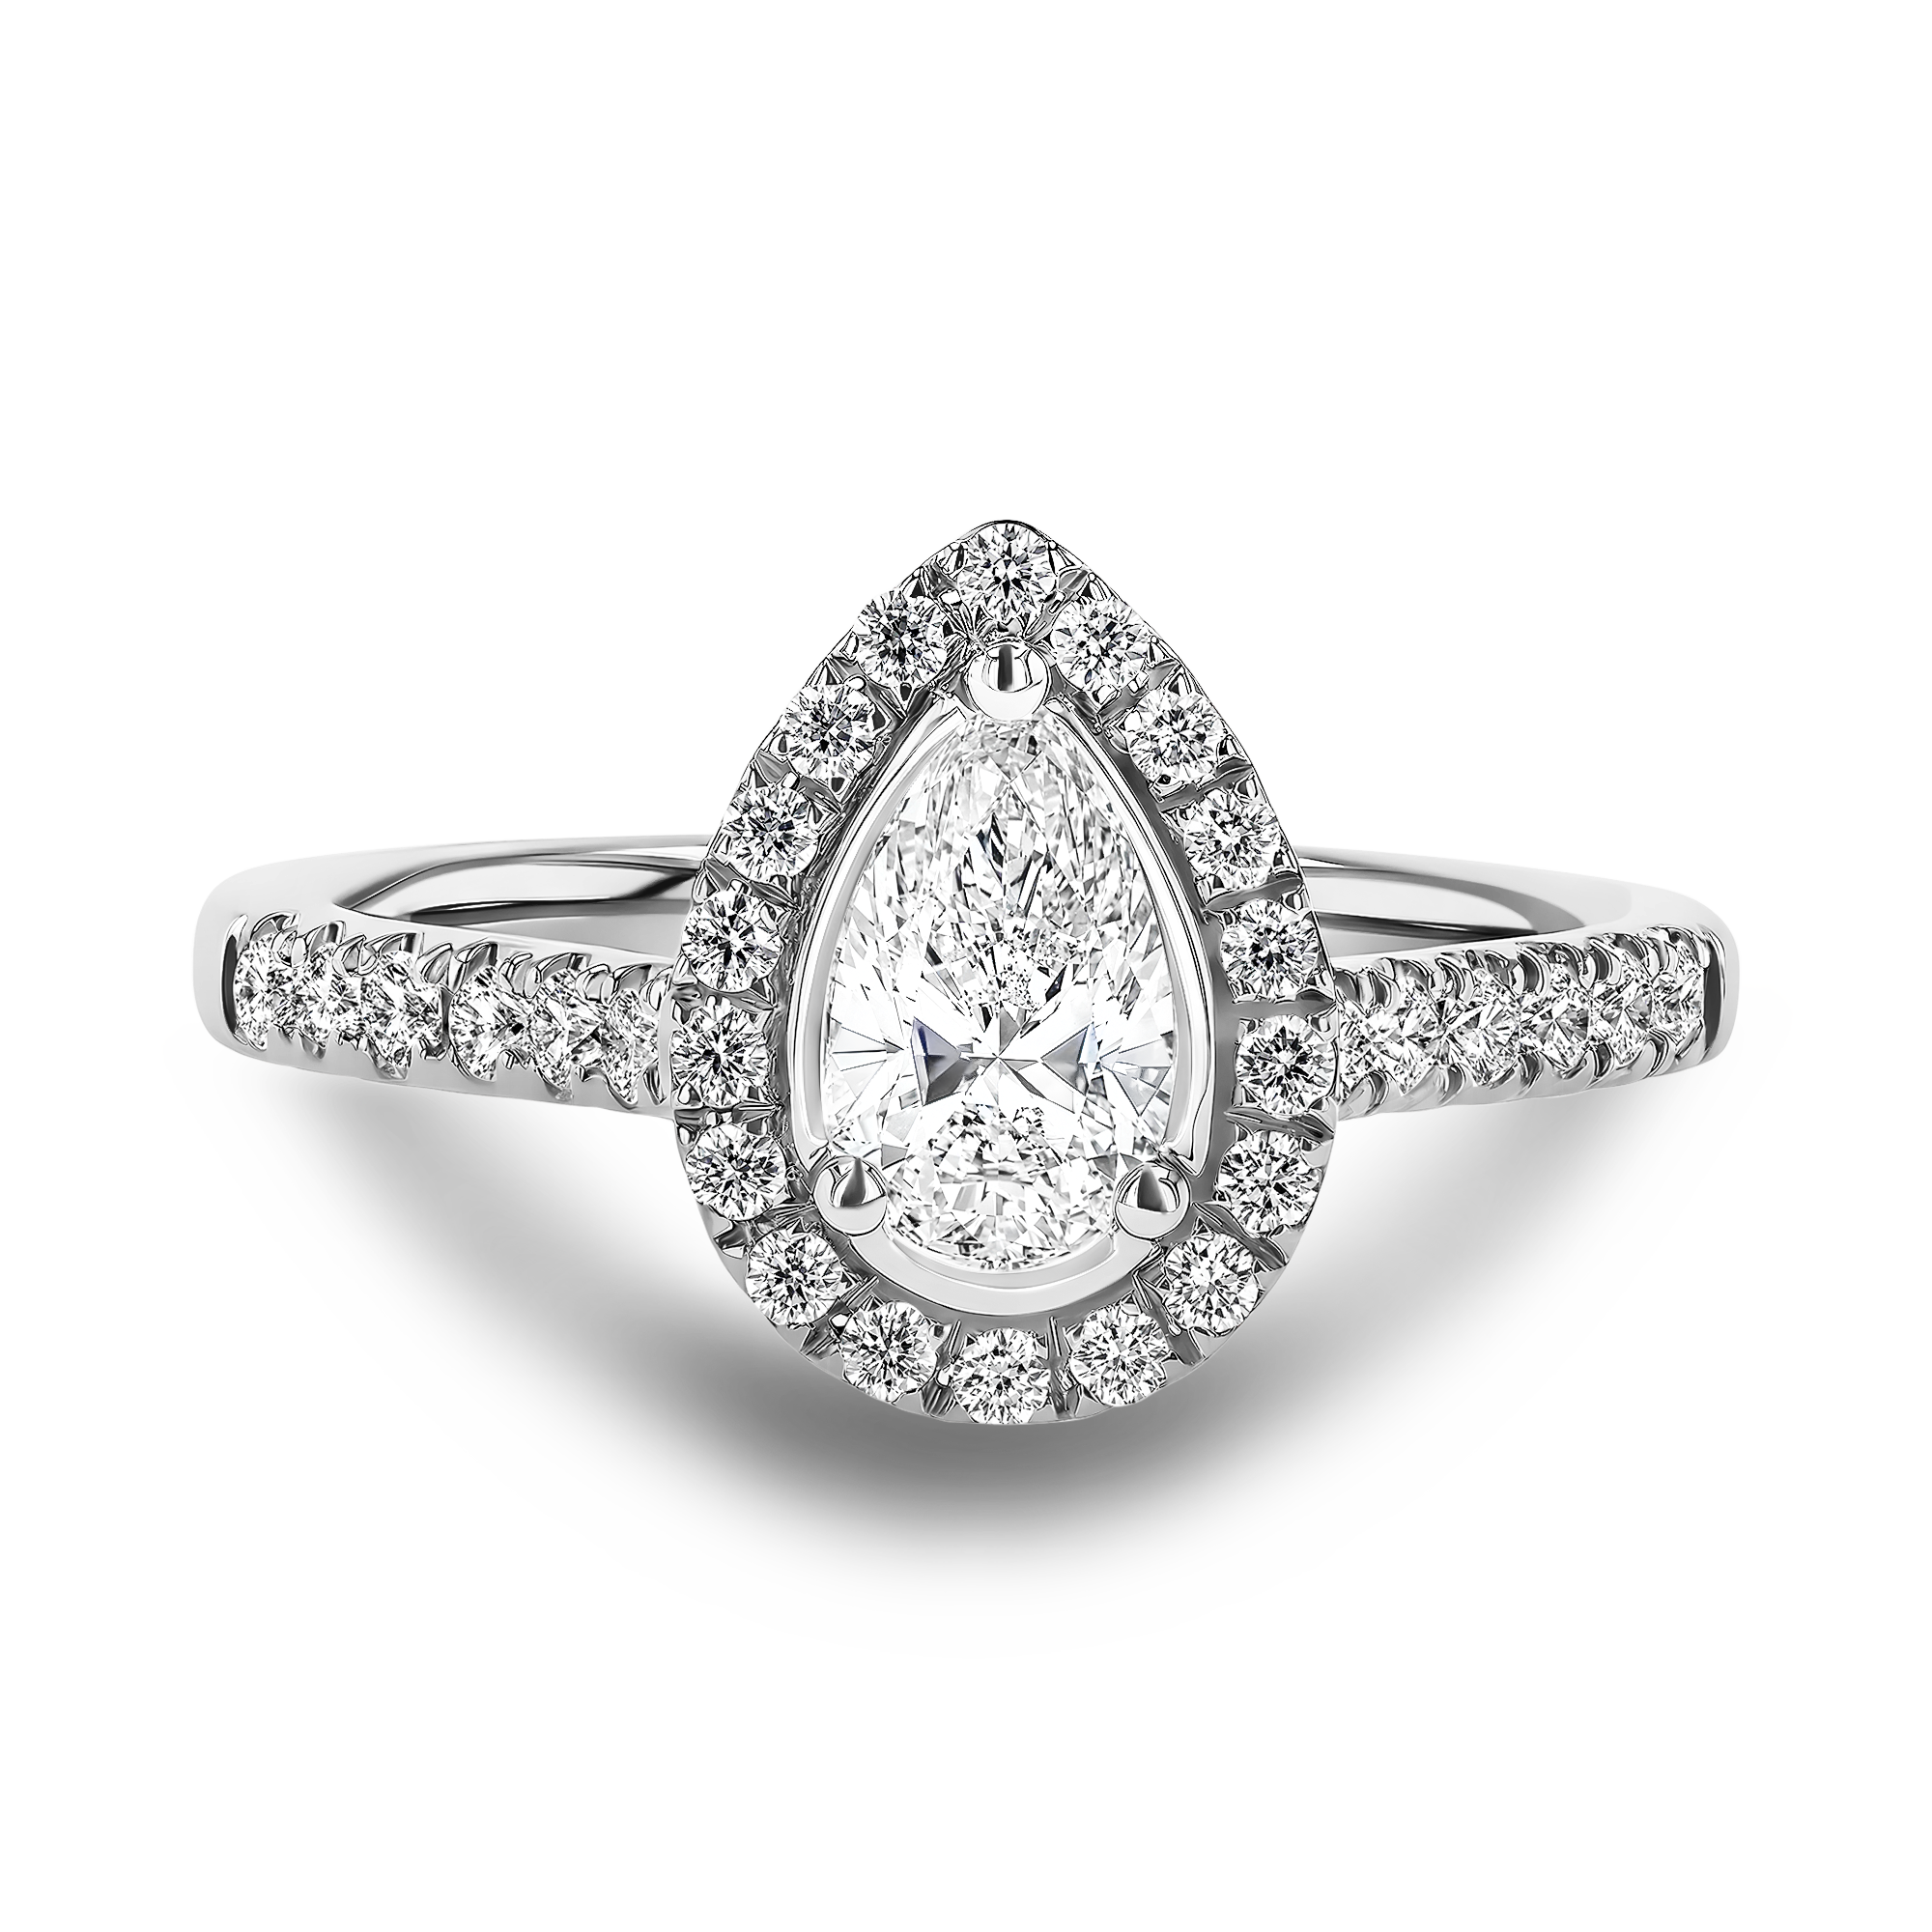 Celestial 0.53ct Diamond Cluster Ring Pear Cut, Claw Set_2